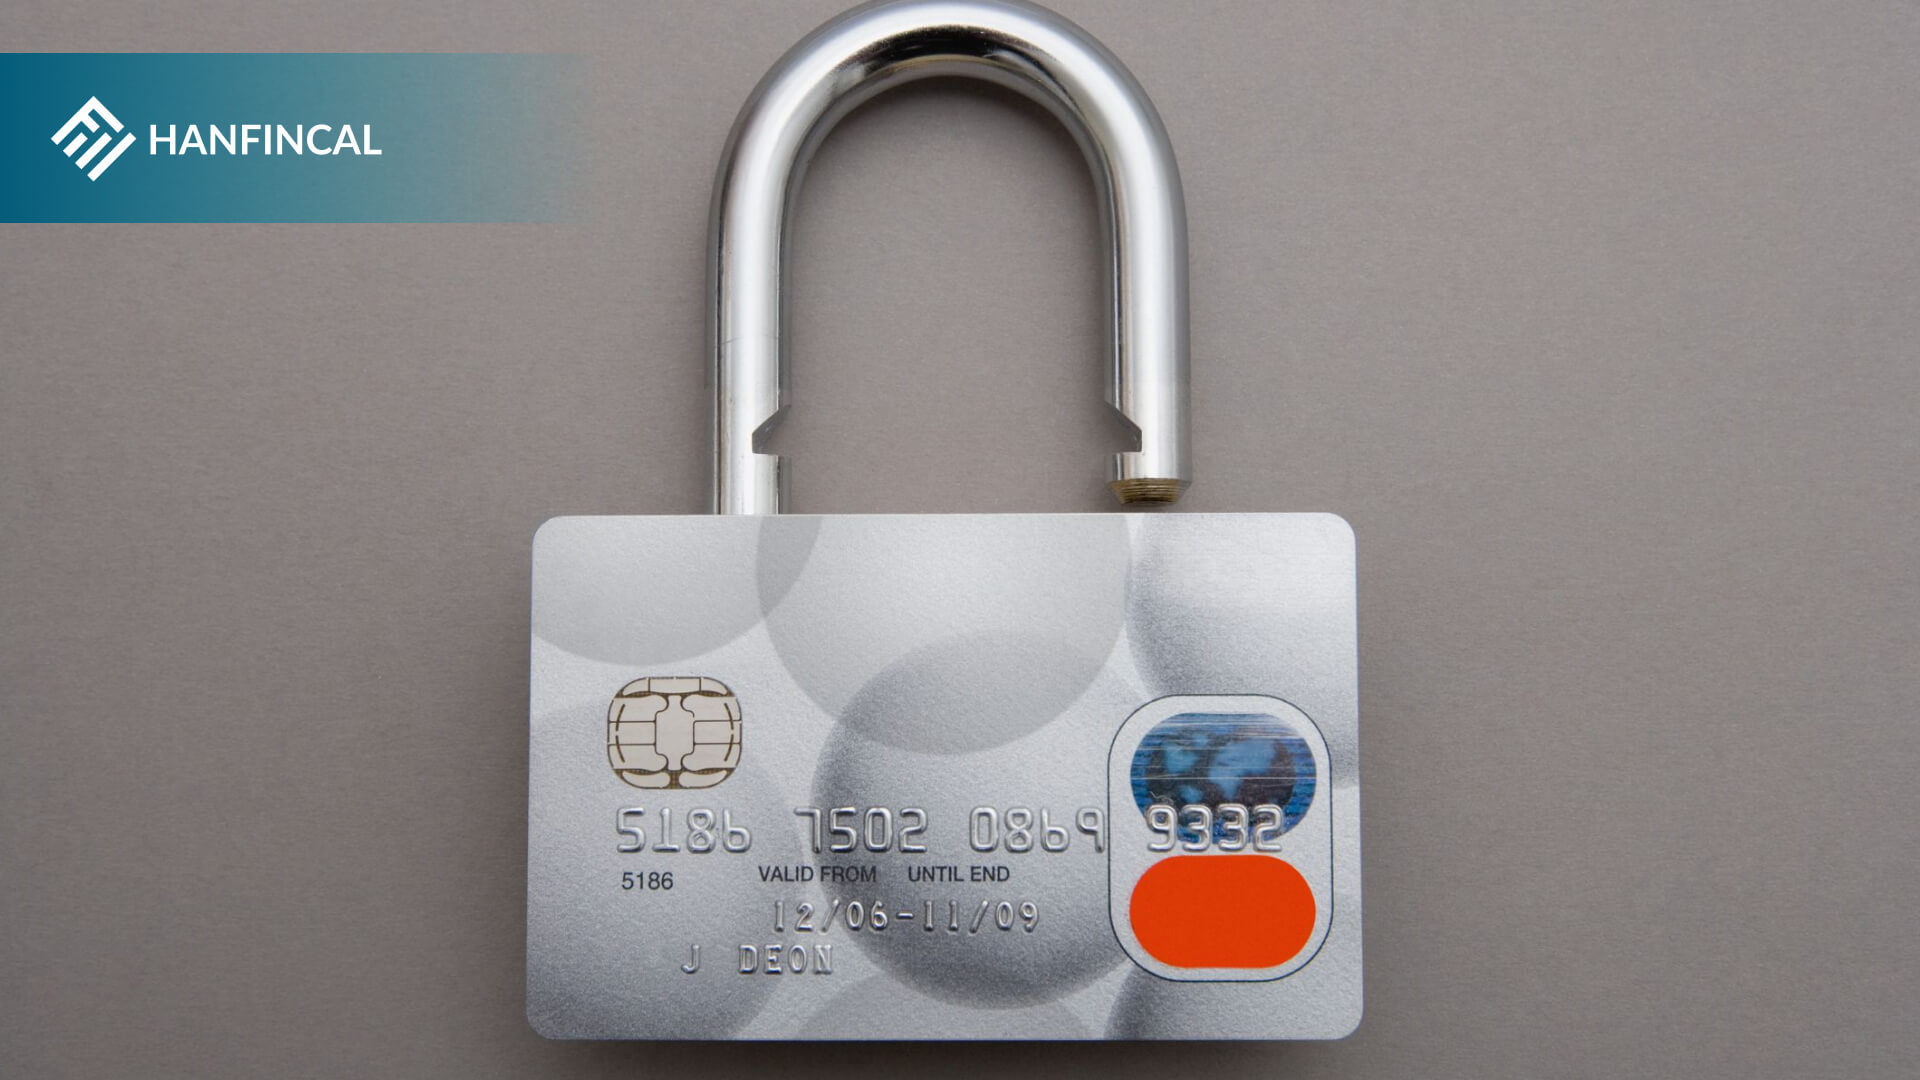 How to avoid credit card fraud?